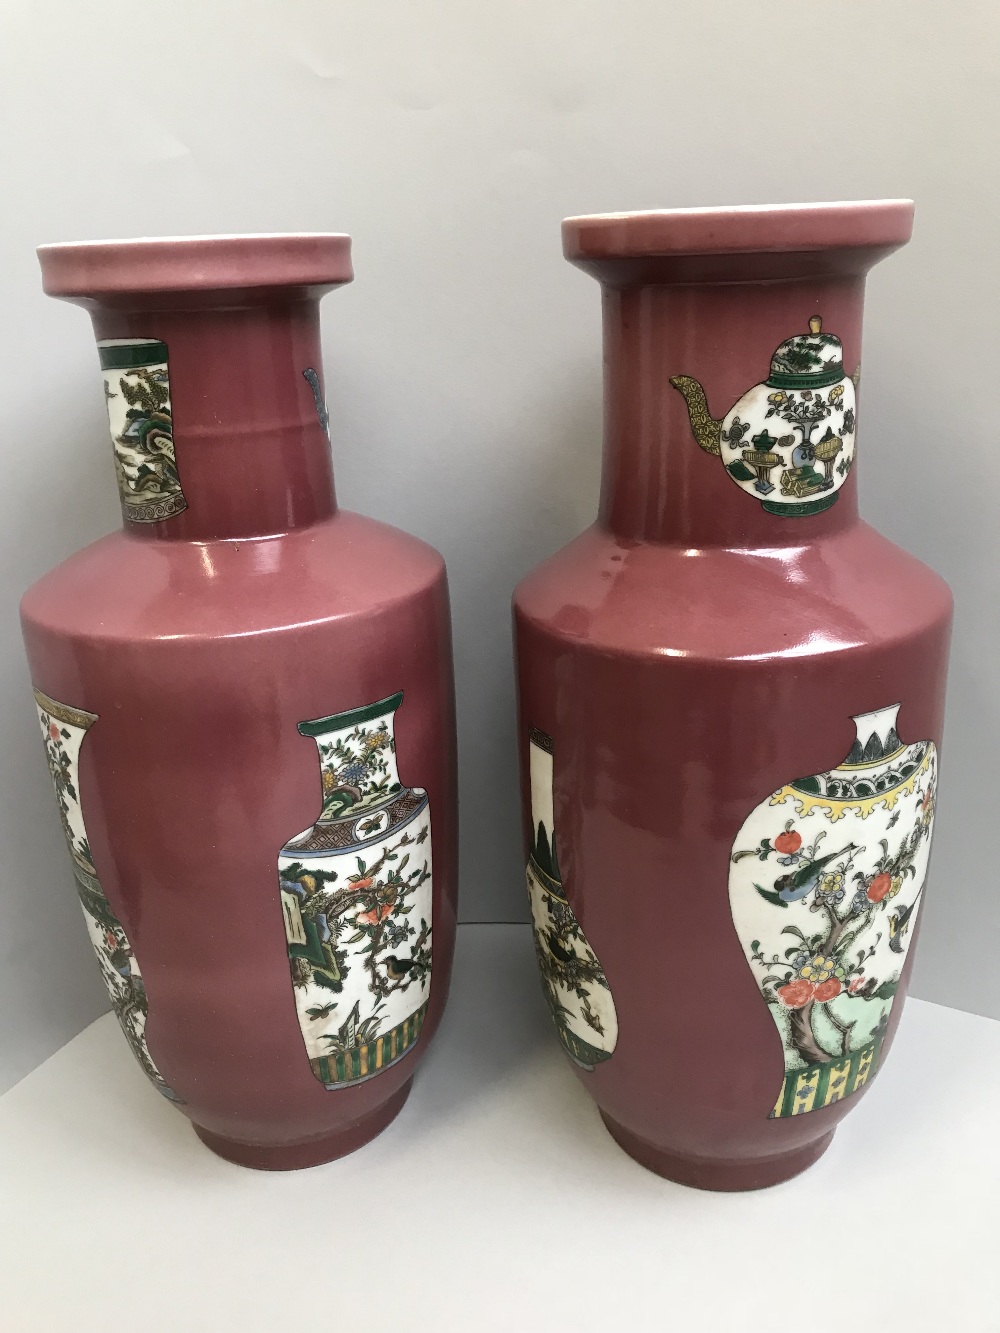 Pair of Chinese Rouleau vases decorated with landscapes & vases on a peach ground, 6 character marks